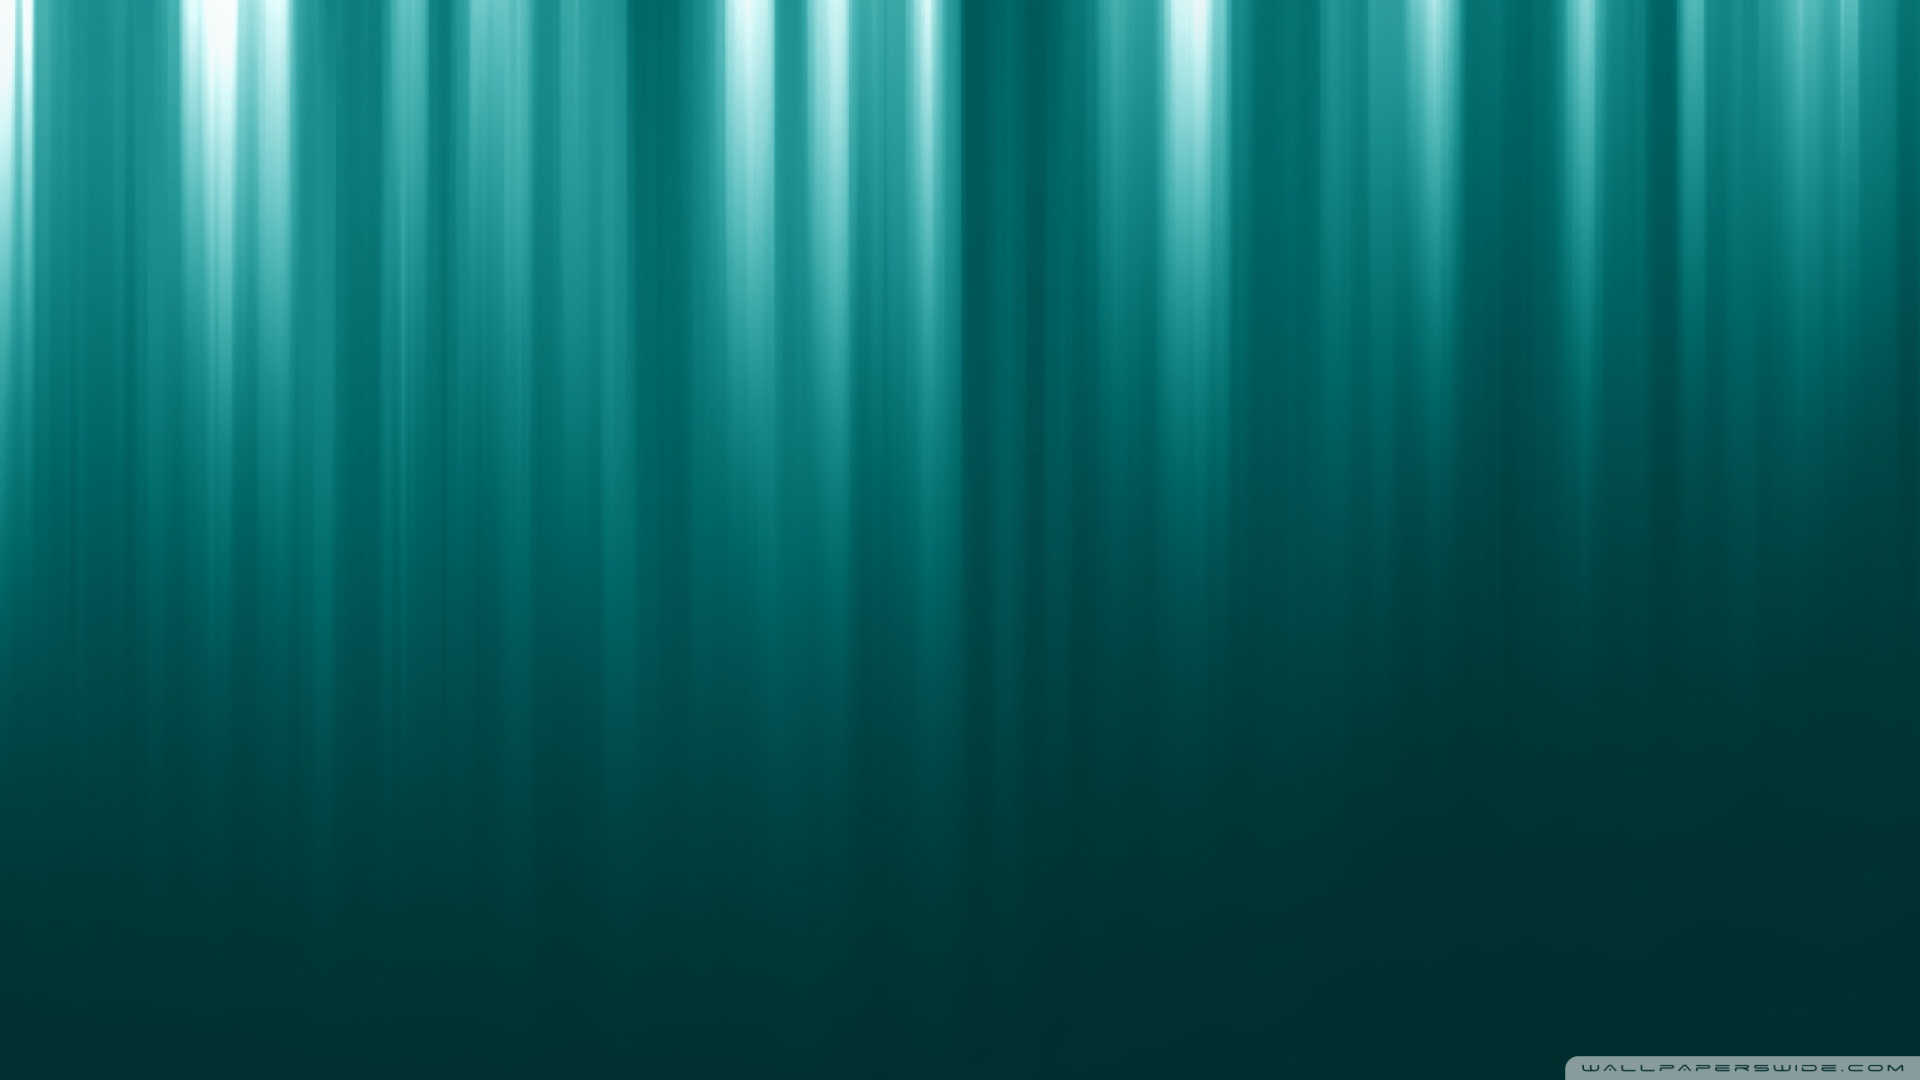 Turquoise Wallpaper Image